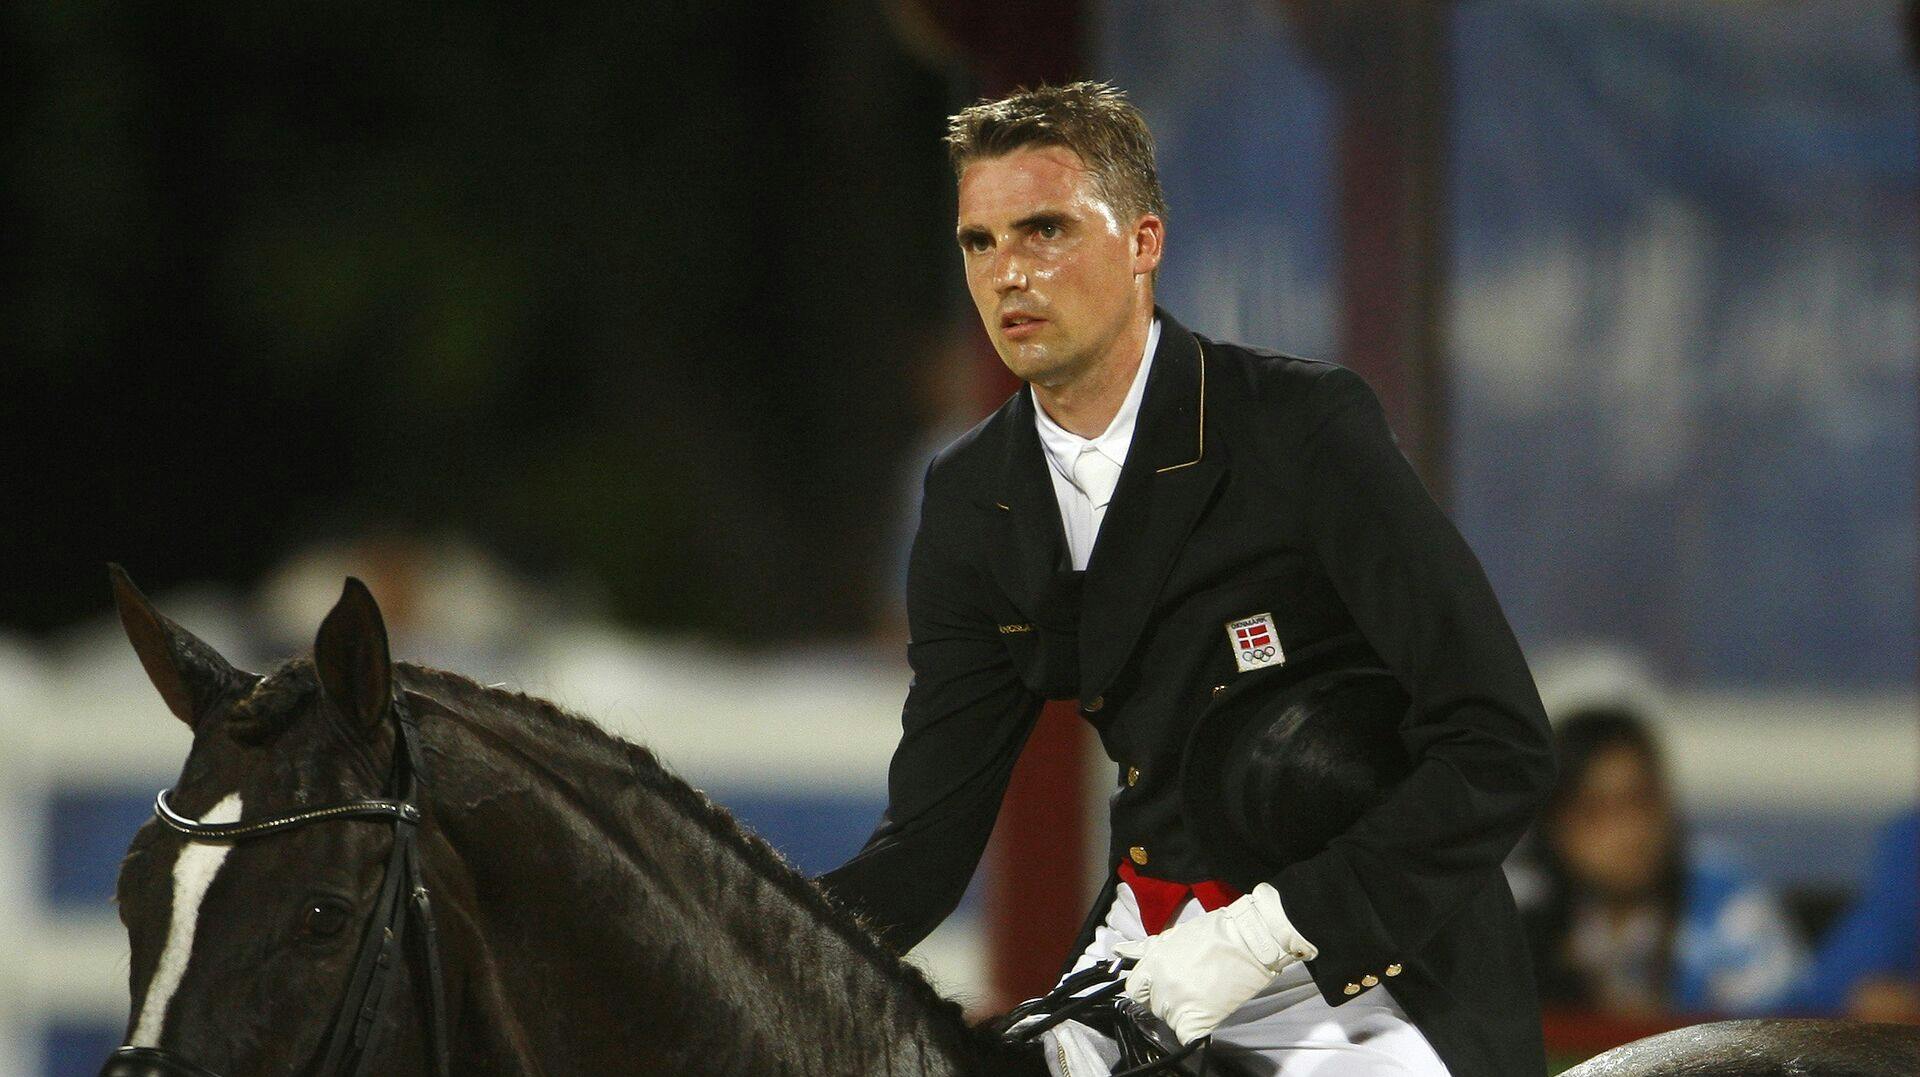 Andreas Helgstrand of Denmark riding Don Schufro reacts after competing in the equestrian dressage individual grand prix special competition at the Beijing 2008 Olympic Games in Hong Kong August 16, 2008. REUTERS/Bobby Yip (CHINA)